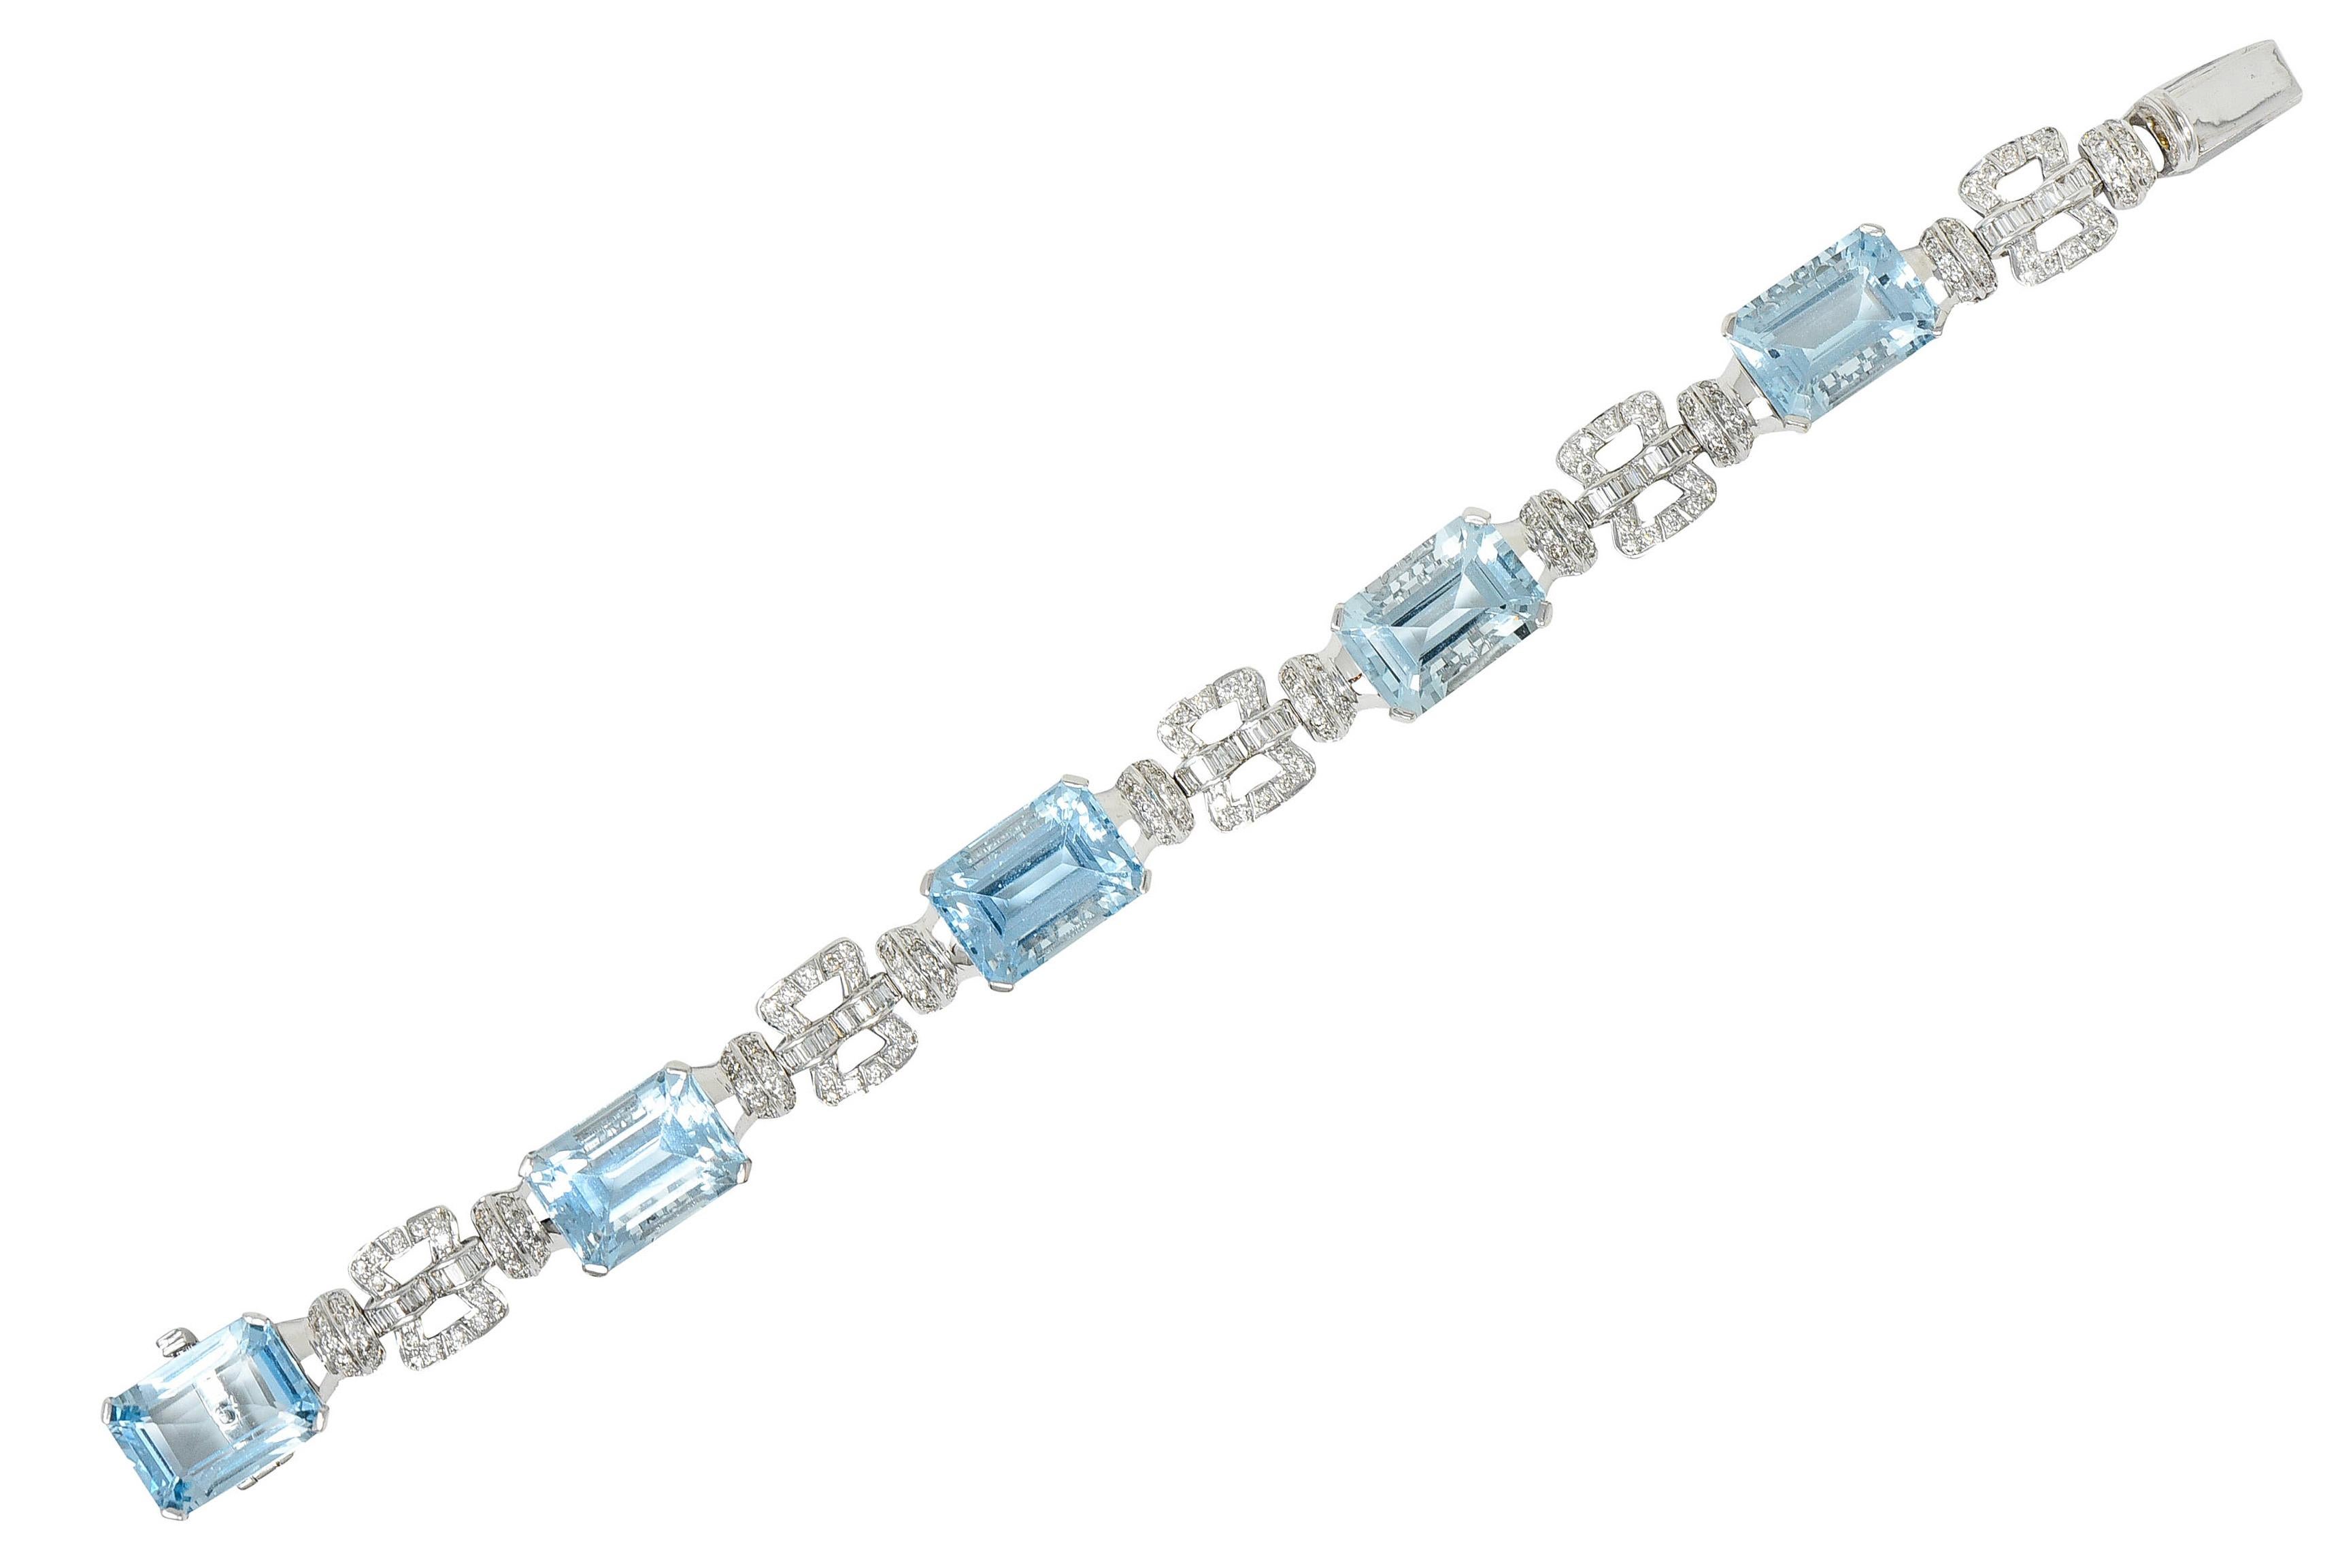 Link bracelet features emerald cut aquamarines weighing approximately 43.00 carats

Set by wide prongs in decoratively scrolled baskets - exhibiting transparent medium light greenish blue color

With stylized buckle links flanked by rondelle spacer